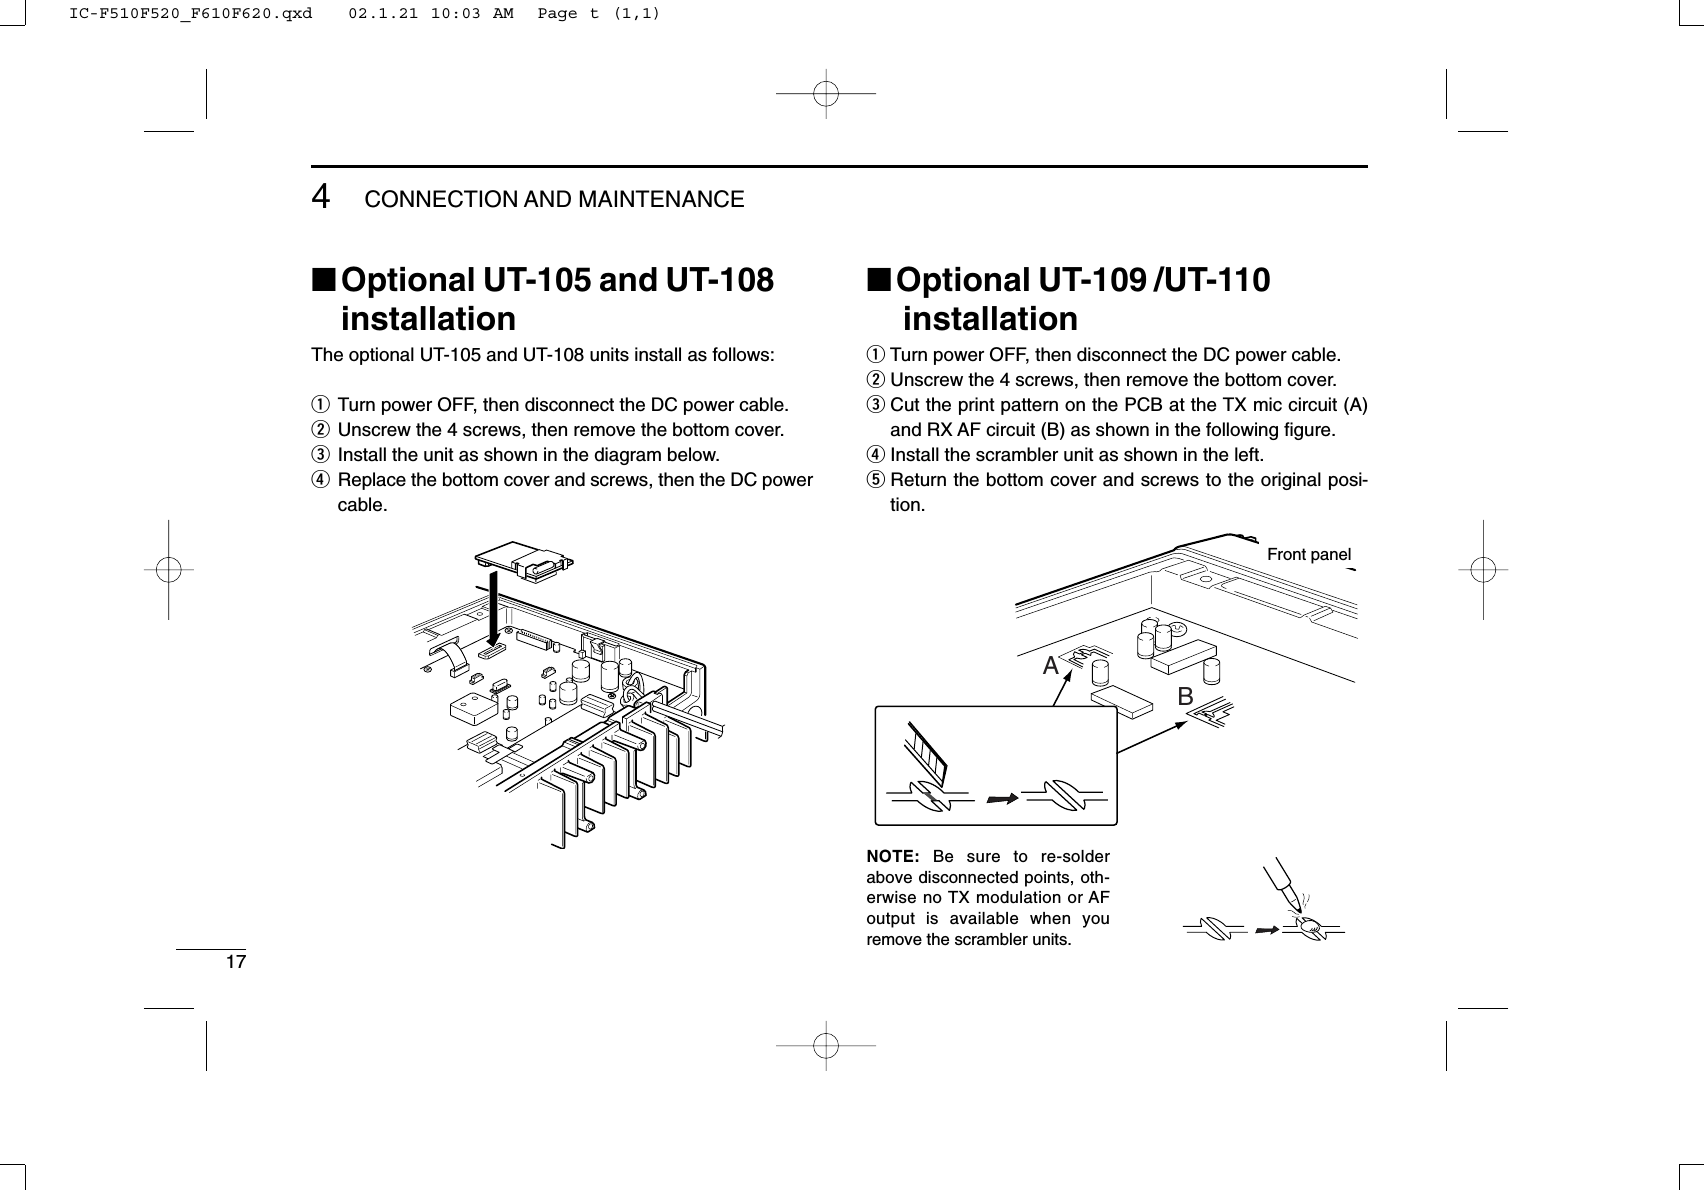 174CONNECTION AND MAINTENANCE■Optional UT-105 and UT-108installationThe optional UT-105 and UT-108 units install as follows:qTurn power OFF, then disconnect the DC power cable.wUnscrew the 4 screws, then remove the bottom cover.eInstall the unit as shown in the diagram below.rReplace the bottom cover and screws, then the DC powercable.■Optional UT-109 /UT-110installationqTurn power OFF, then disconnect the DC power cable.wUnscrew the 4 screws, then remove the bottom cover.eCut the print pattern on the PCB at the TX mic circuit (A)and RX AF circuit (B) as shown in the following ﬁgure.rInstall the scrambler unit as shown in the left.tReturn the bottom cover and screws to the original posi-tion.NOTE: Be sure to re-solderabove disconnected points, oth-erwise no TX modulation or AFoutput is available when youremove the scrambler units.ABFront panelIC-F510F520_F610F620.qxd   02.1.21 10:03 AM  Page t (1,1)